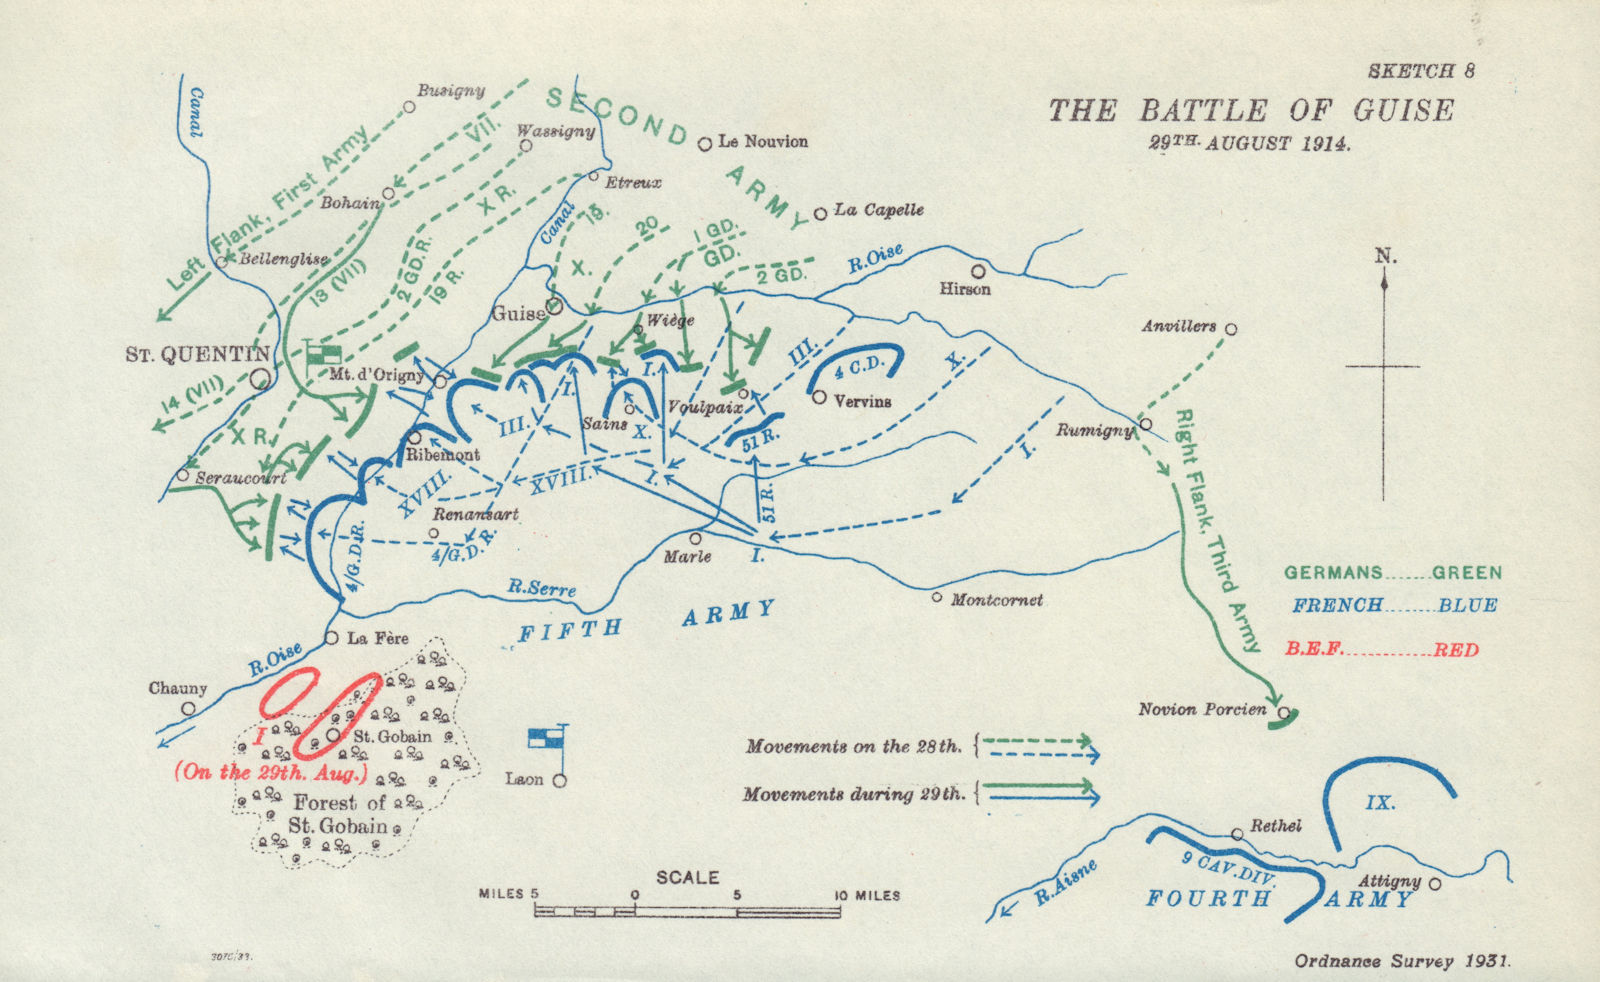 The Battle of Guise or St. Quentin, 29th August 1914. First World War. 1933 map